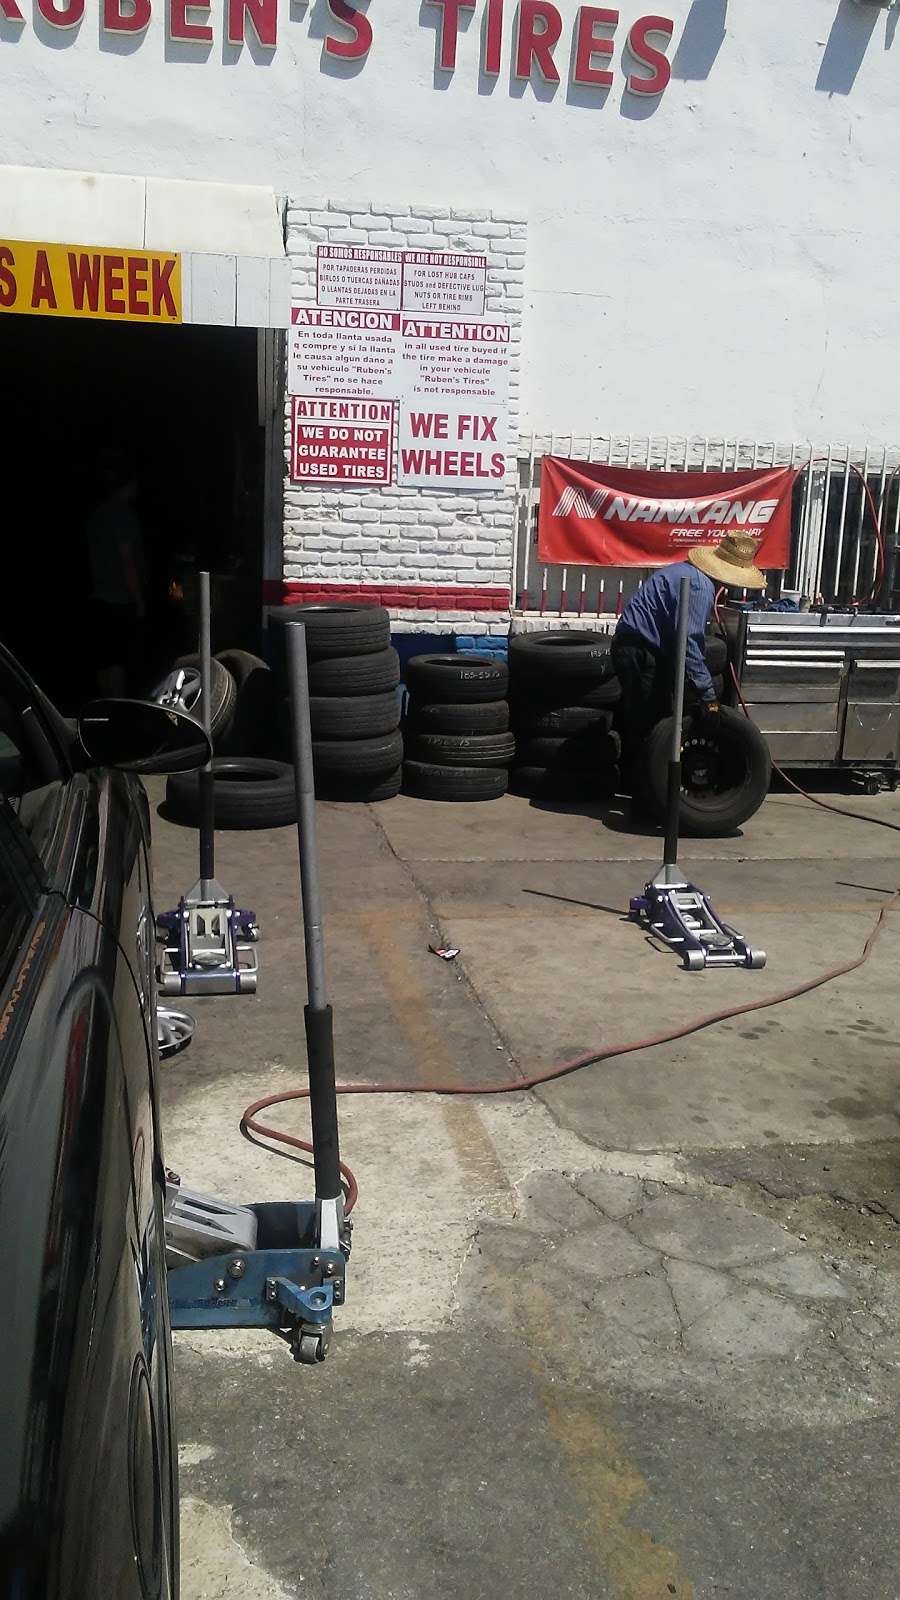 Rubens Tires | 13718 Old 215 Frontage Rd, Moreno Valley, CA 92553 | Phone: (951) 653-9158